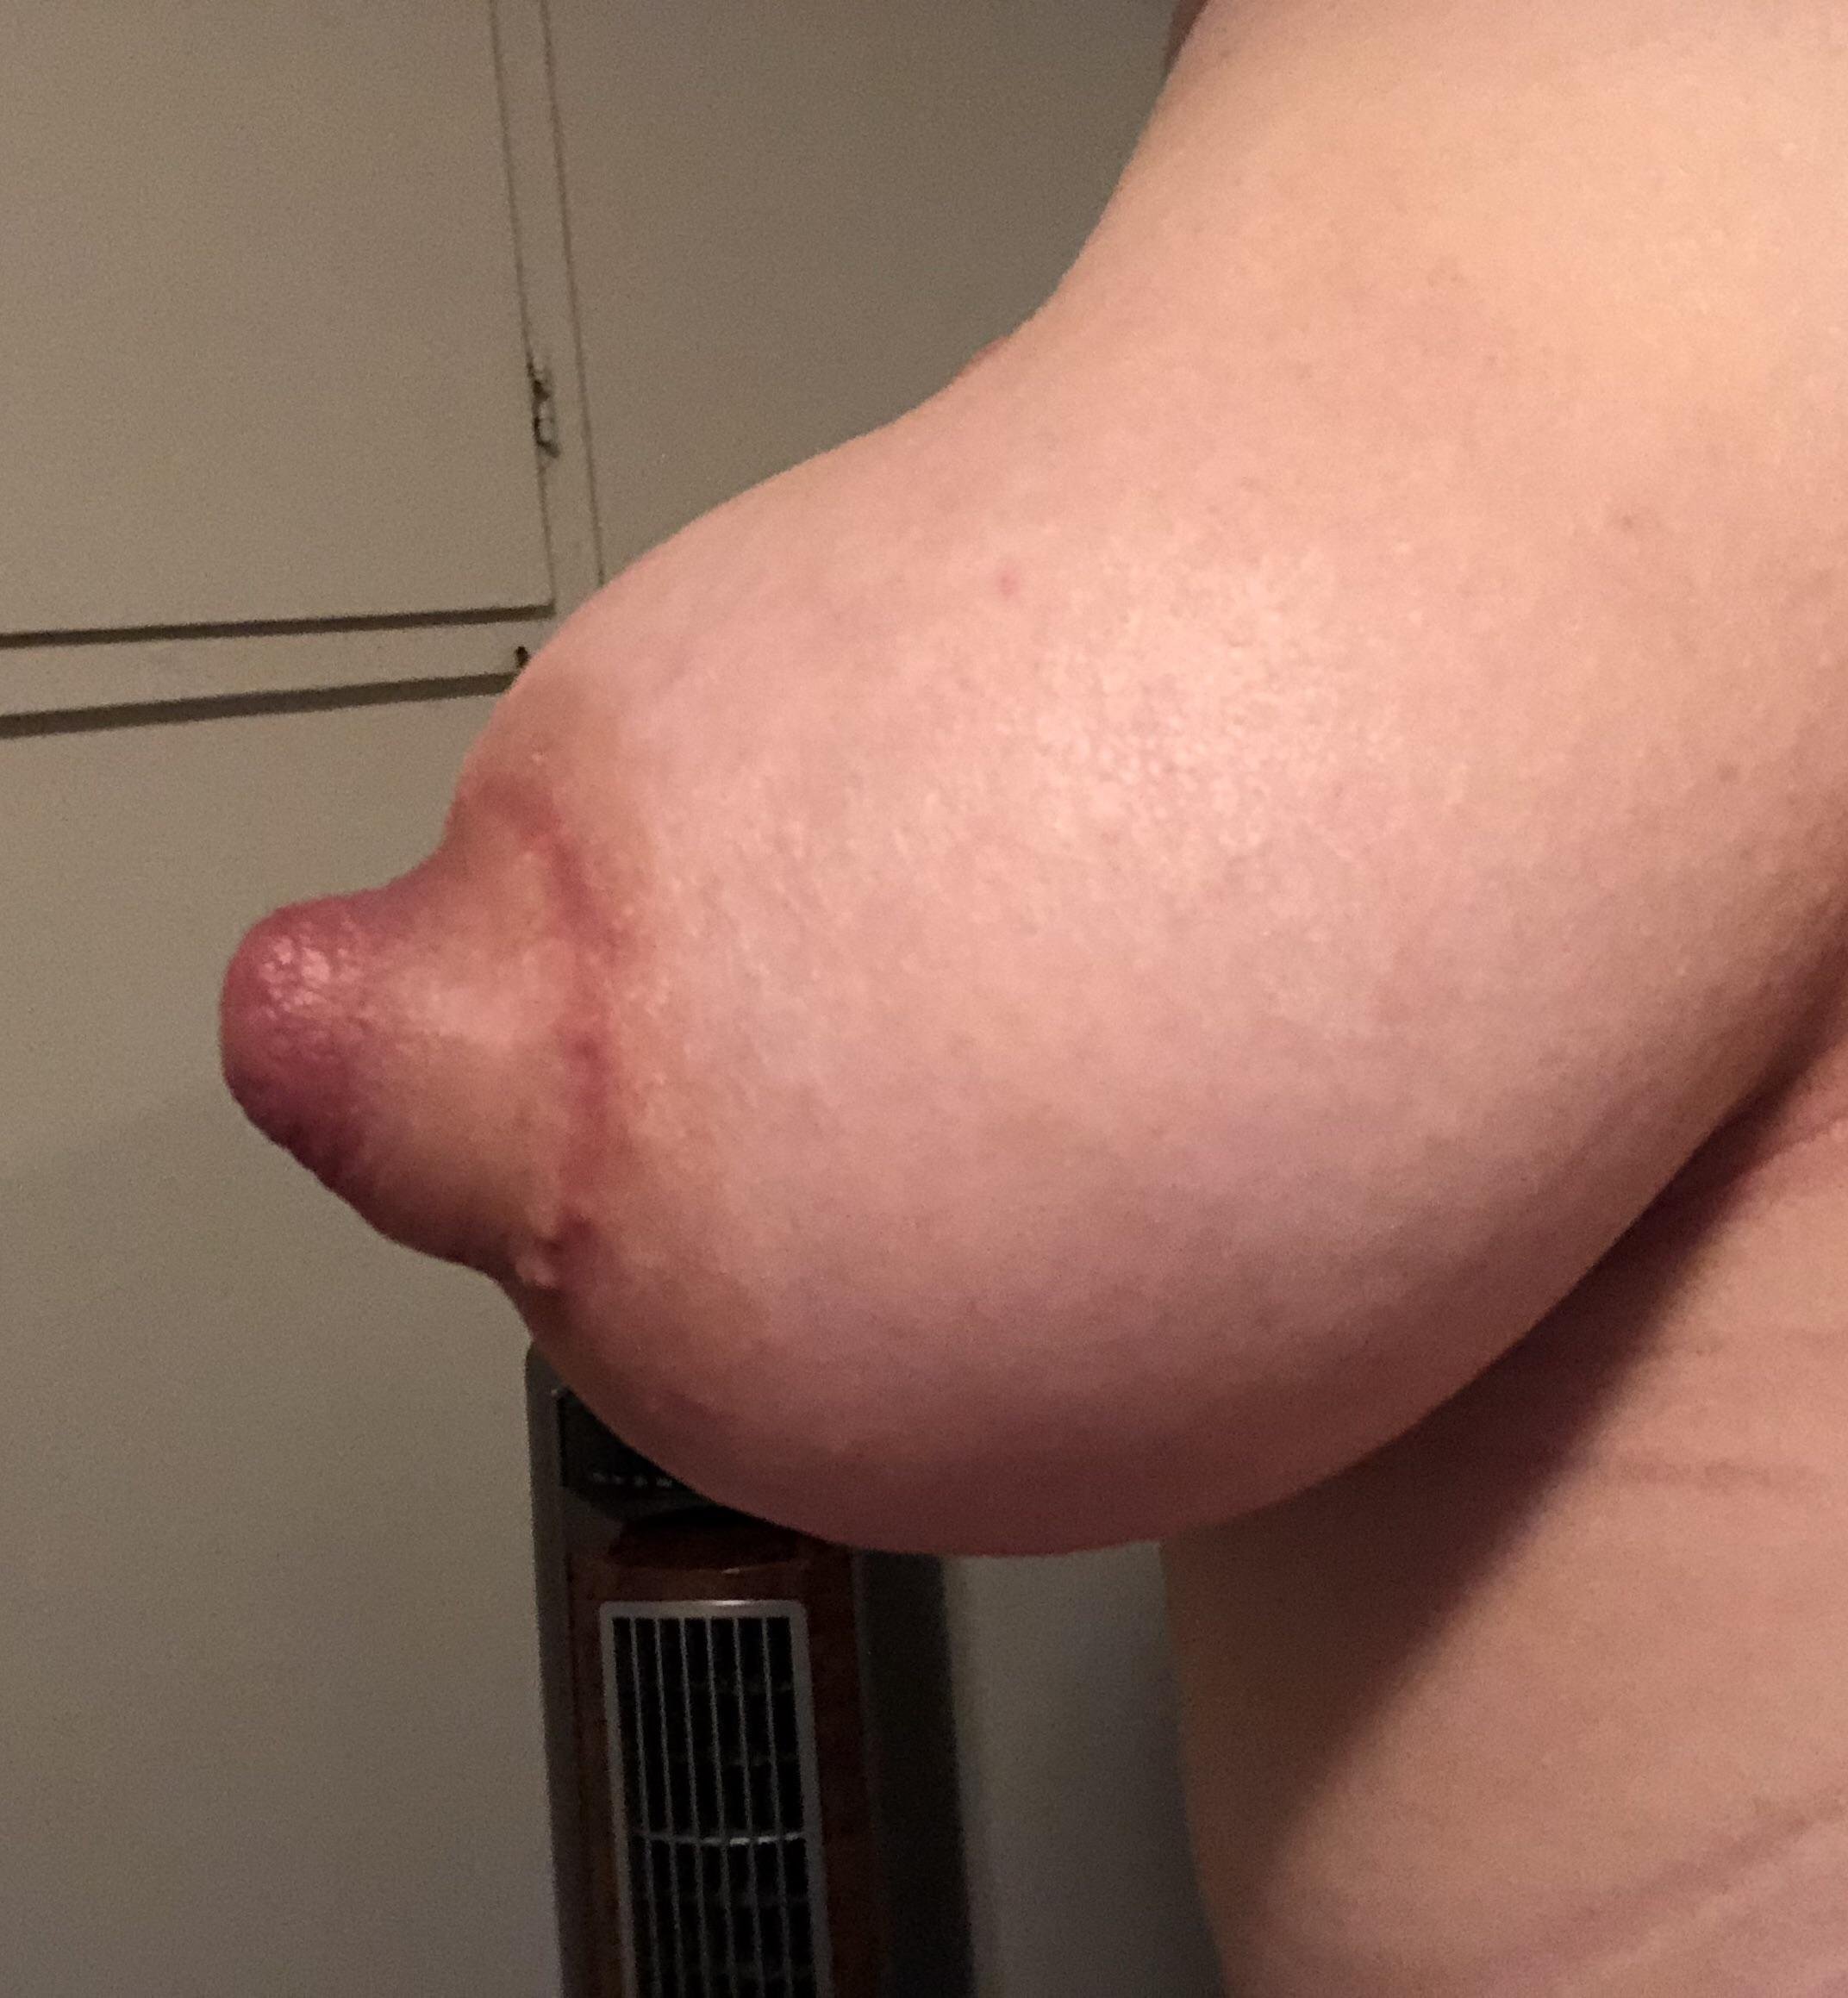 Another pic of the effects of 4 hours of suction teat training under my clothes while out in public